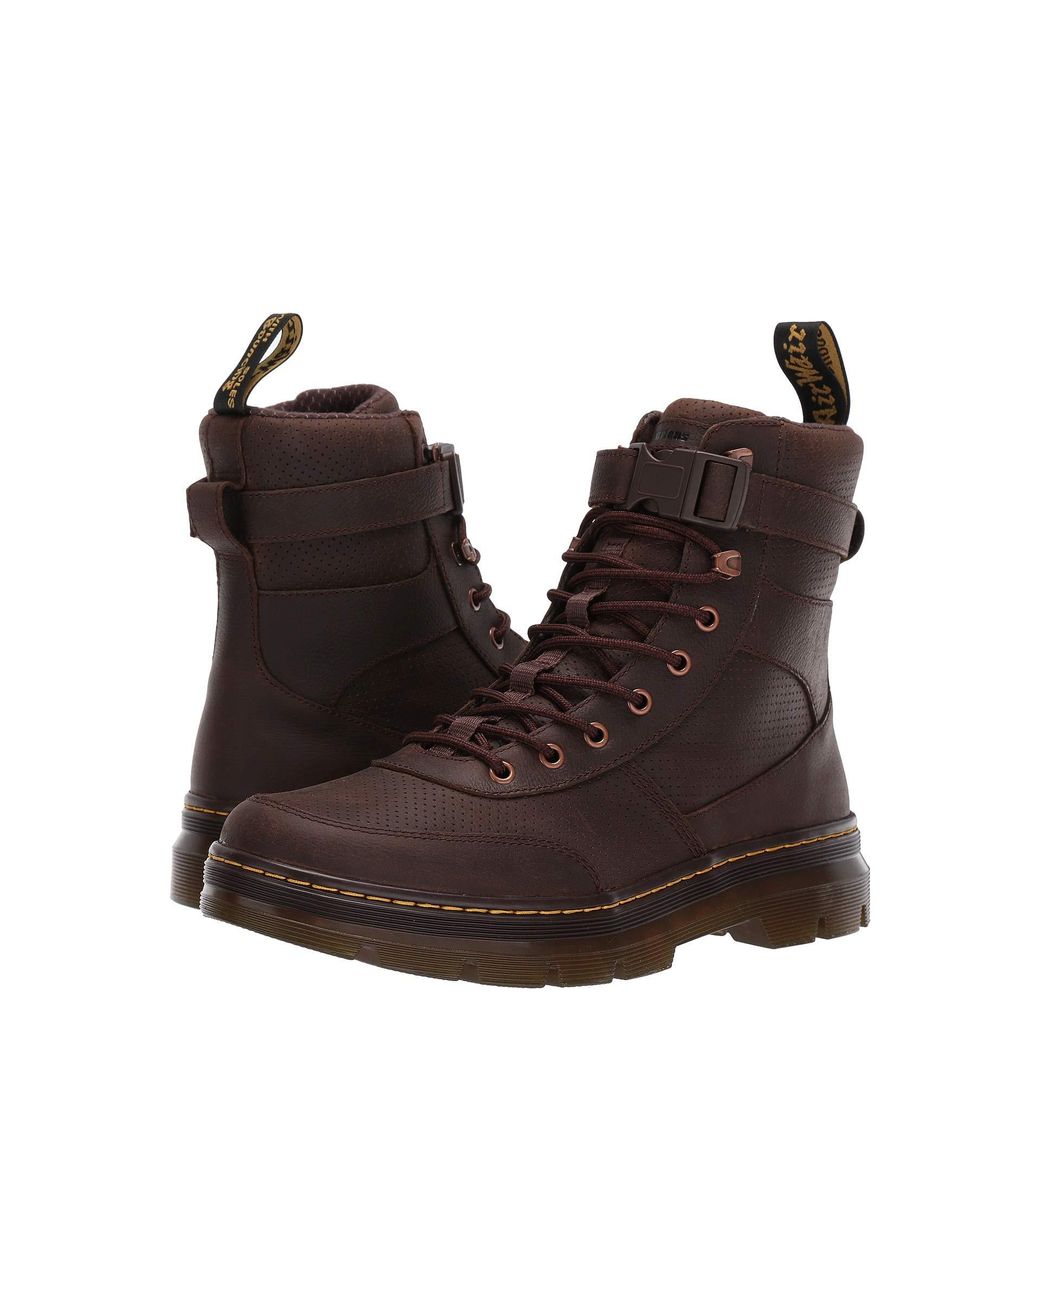 Lyst - Dr. Martens Combs Tech Tract in Brown